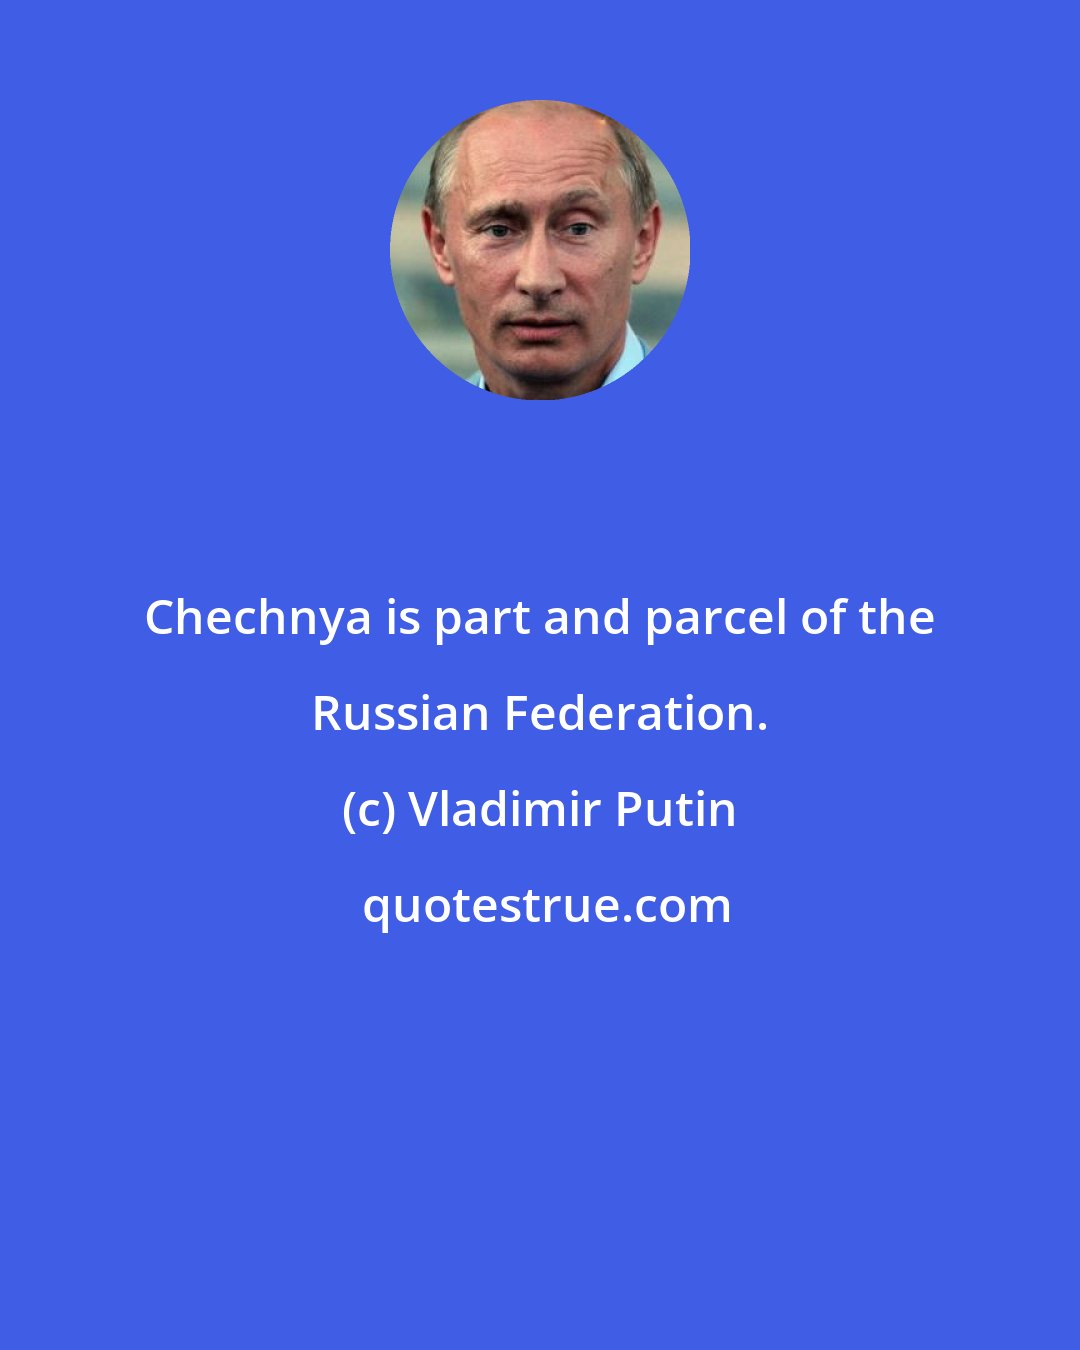 Vladimir Putin: Chechnya is part and parcel of the Russian Federation.